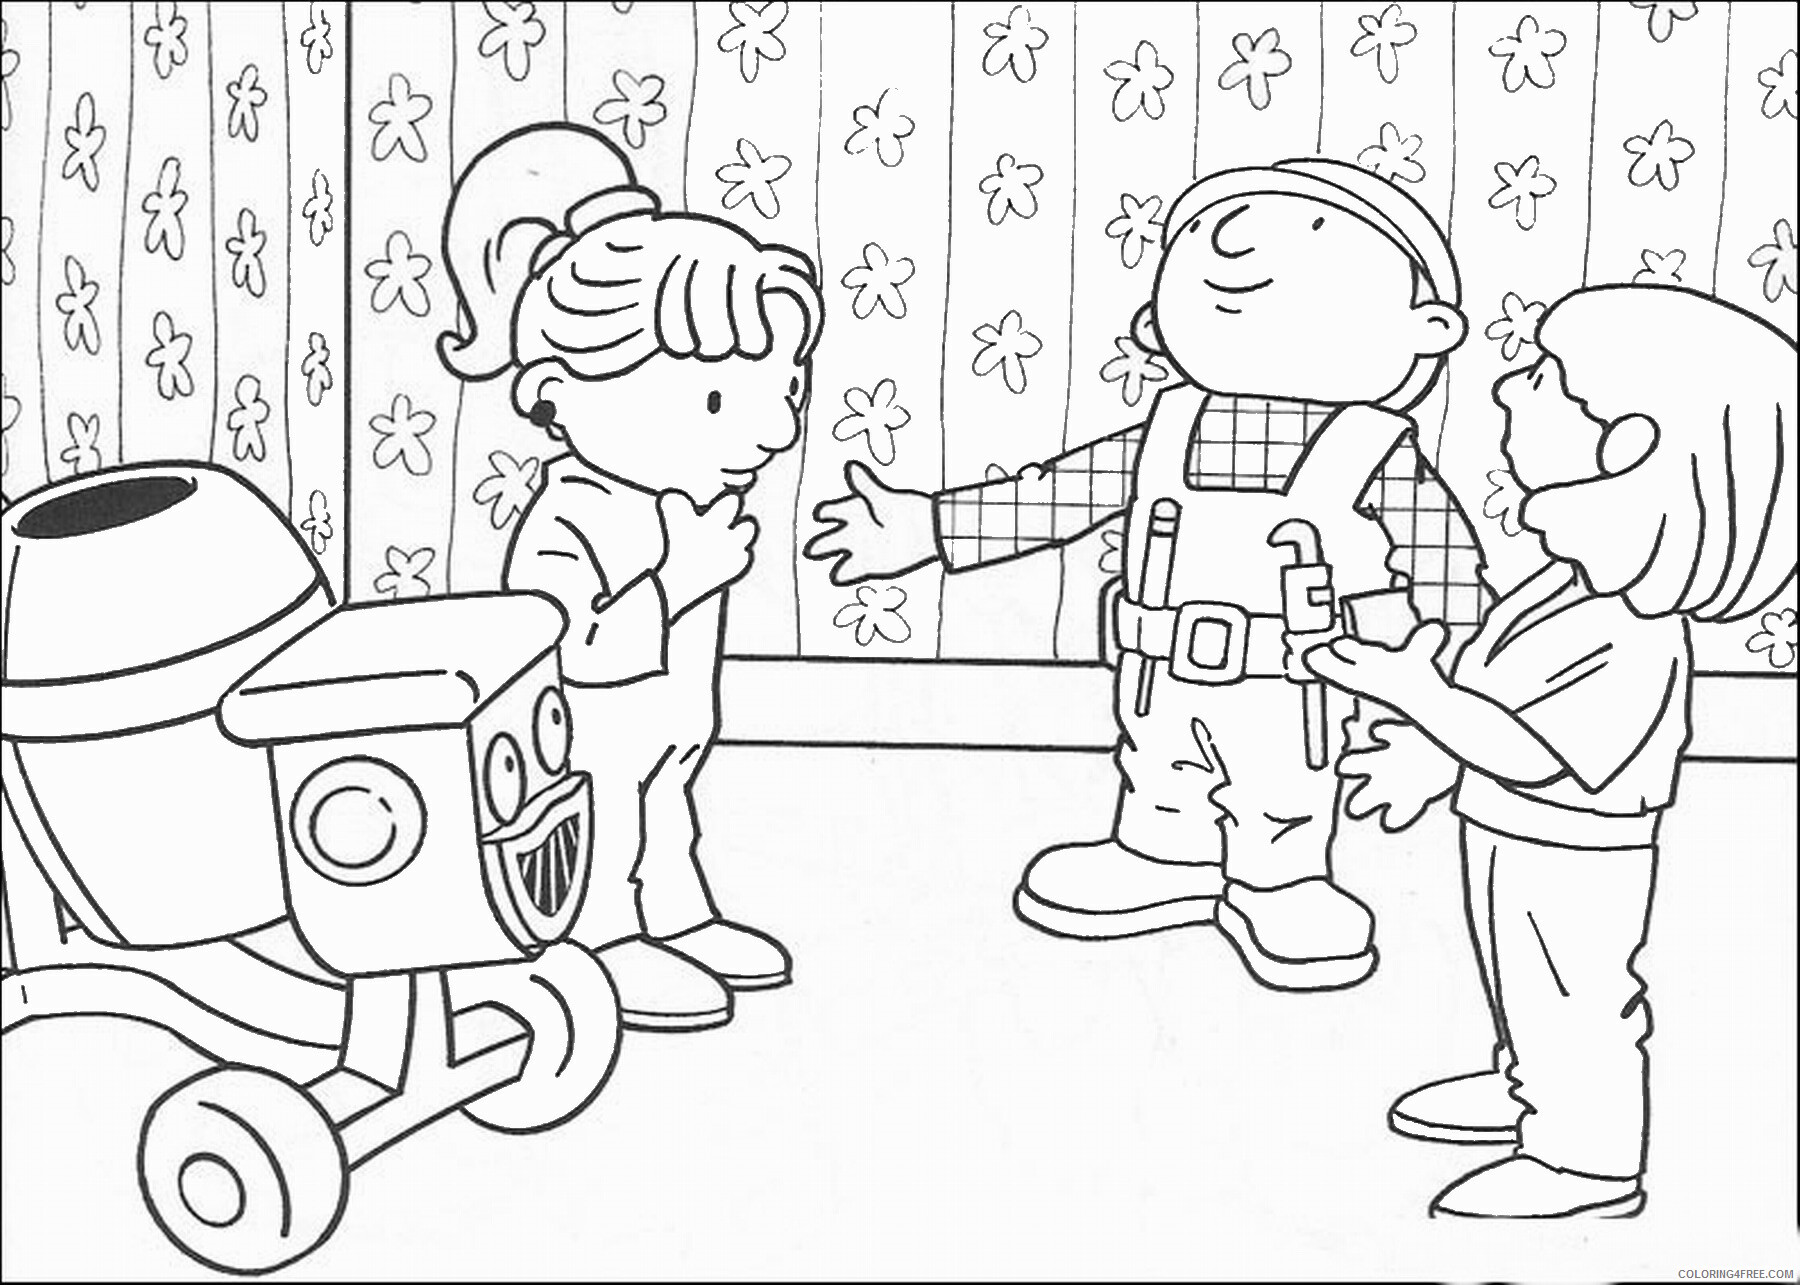 Bob the Builder Coloring Pages TV Film bob the builder_13 Printable 2020 00963 Coloring4free